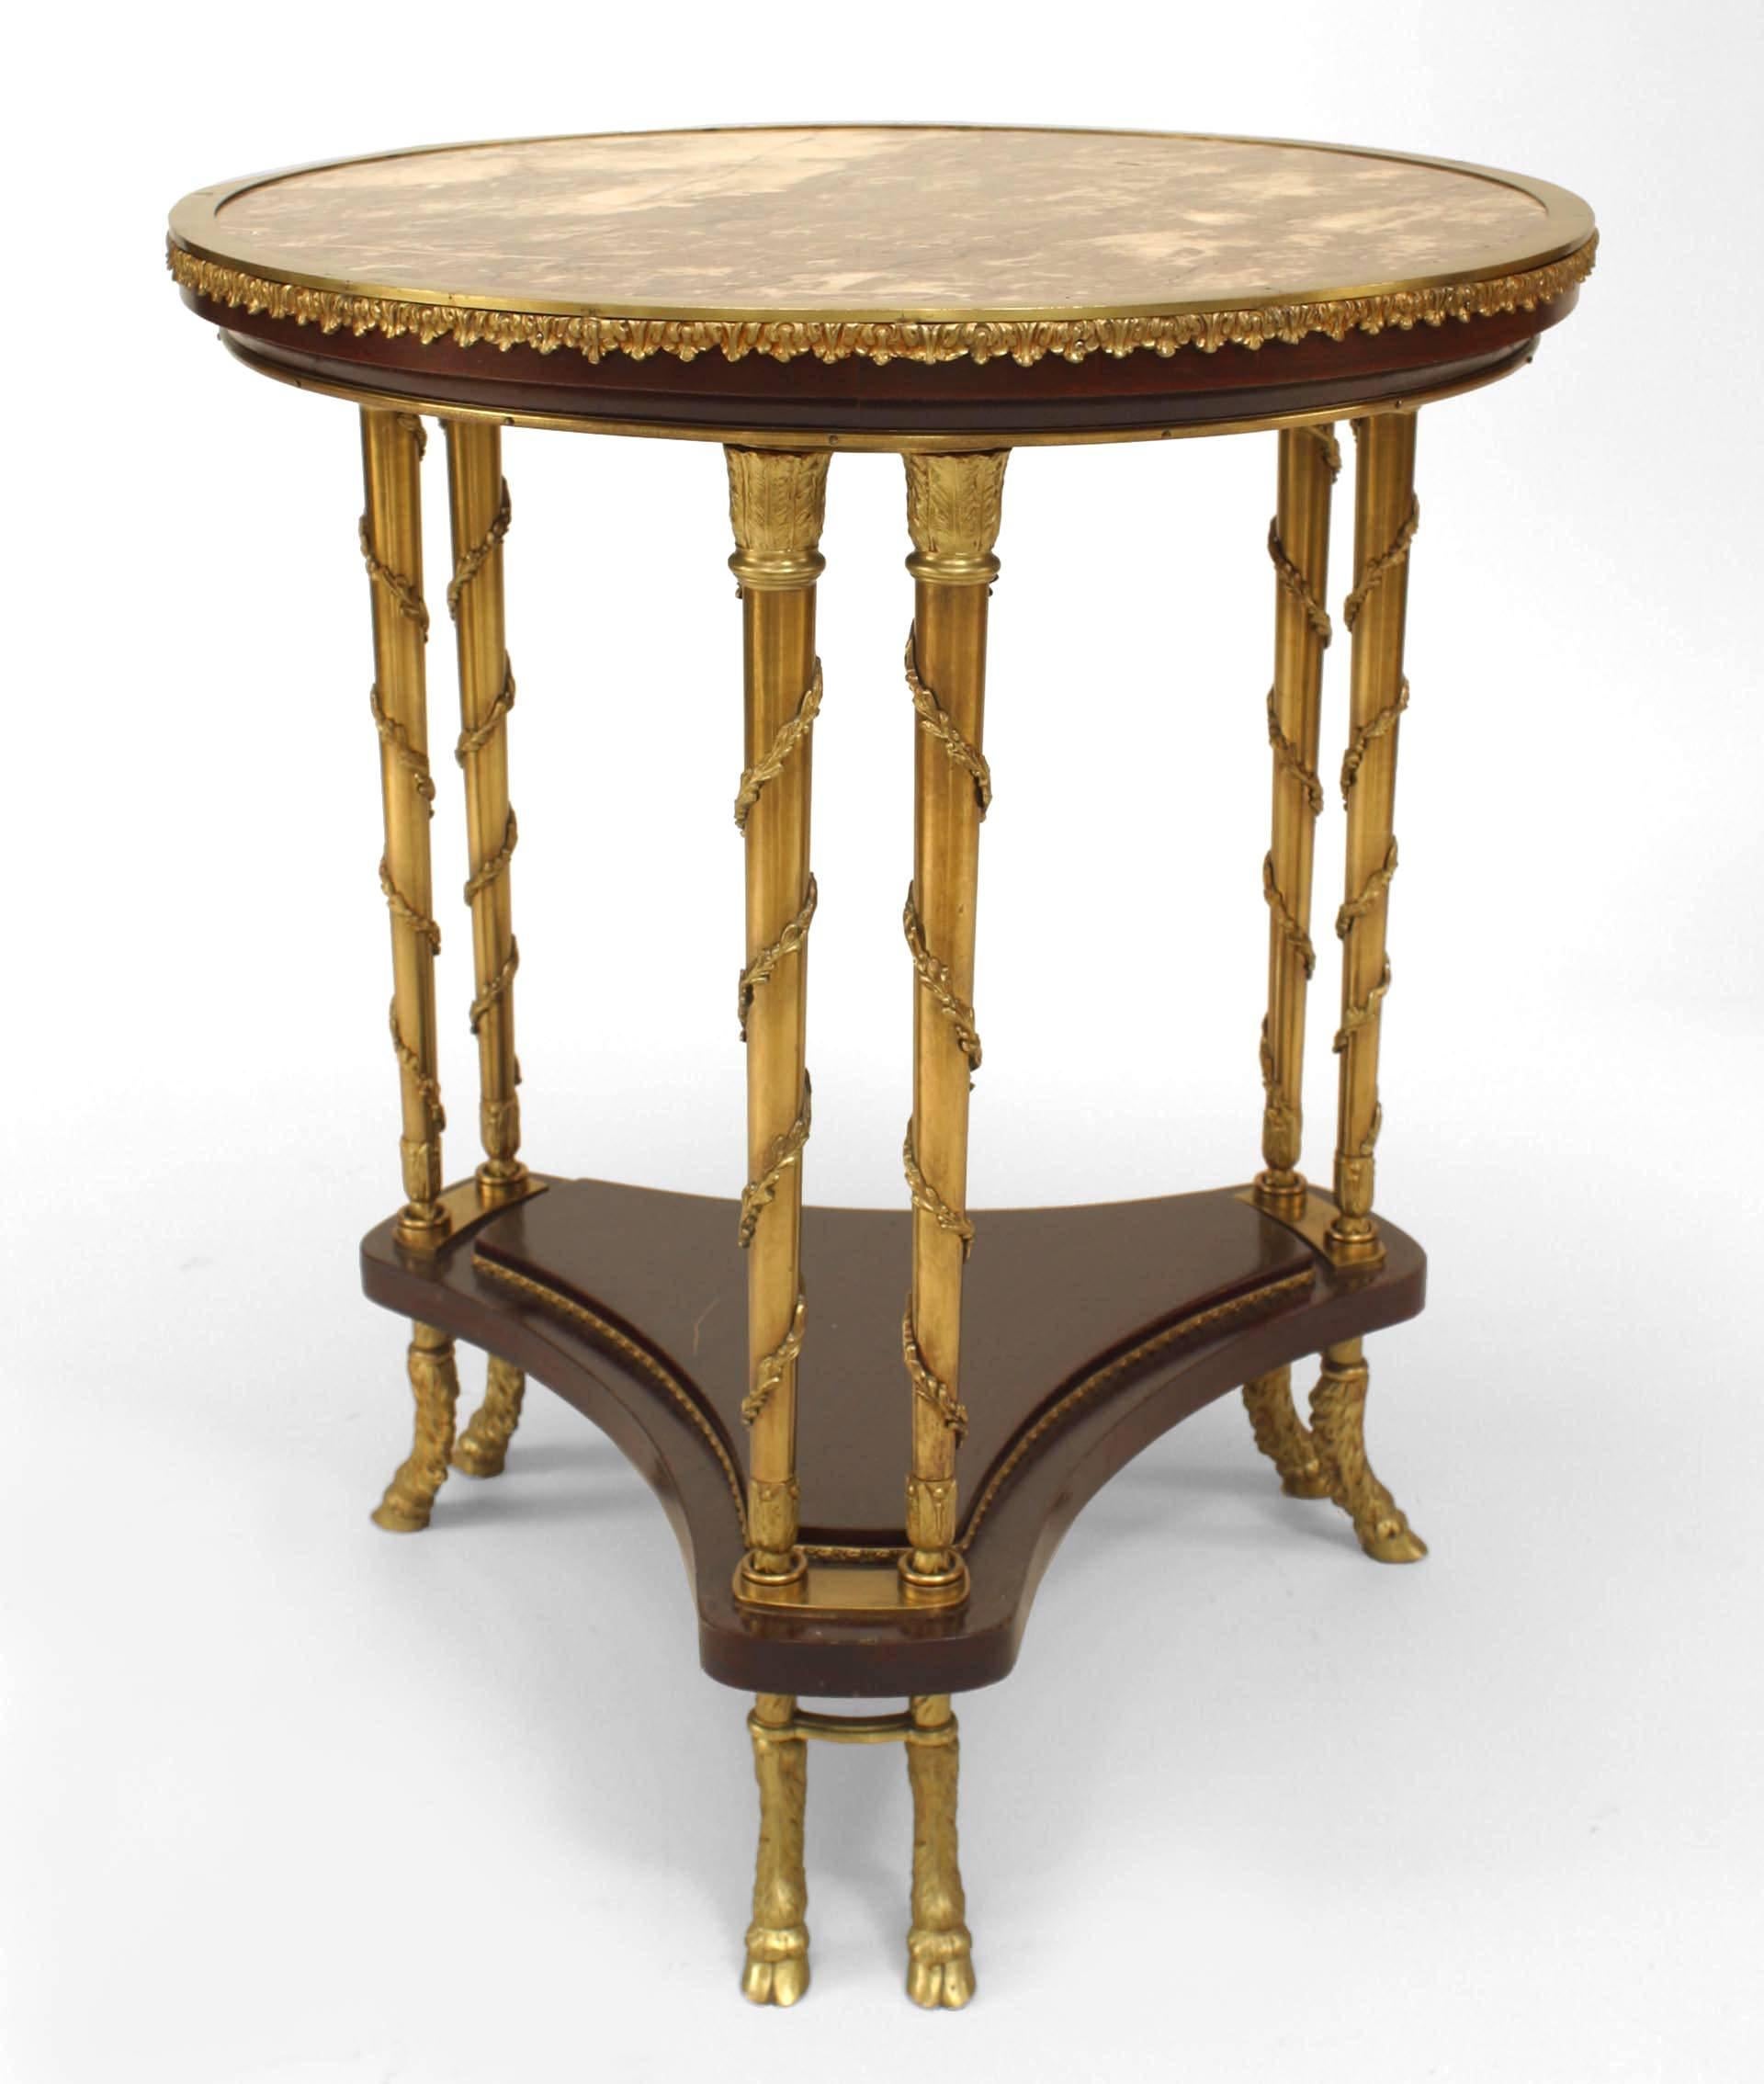 French Charles X style (late 19th Century) mahogany and bronze end table with round inset marble top and mahogany platform shelf with double bronze and trim legs and double hoof feet.
